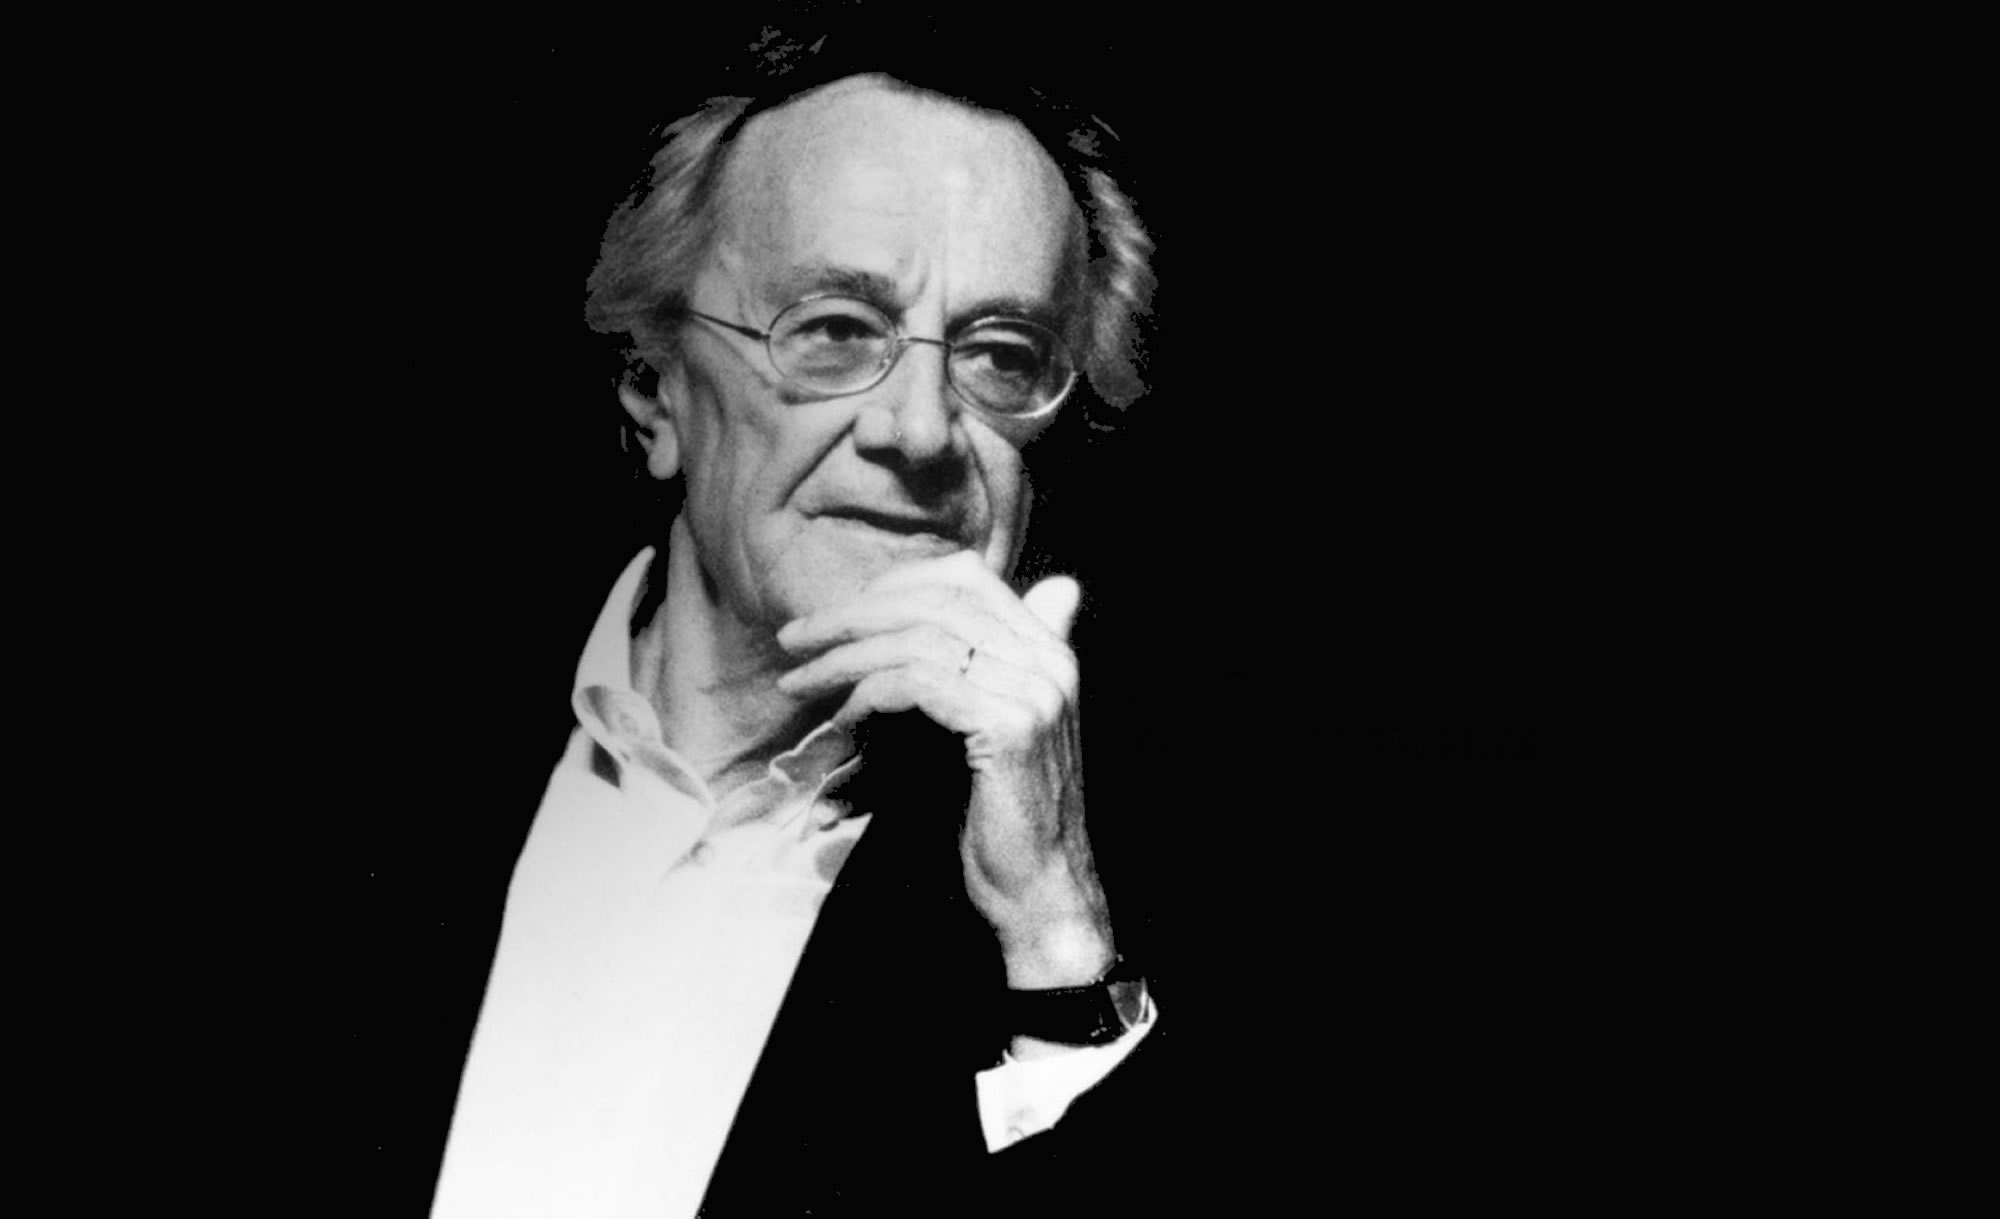 8 Enigmatic Facts About Jean-François Lyotard - Facts.net